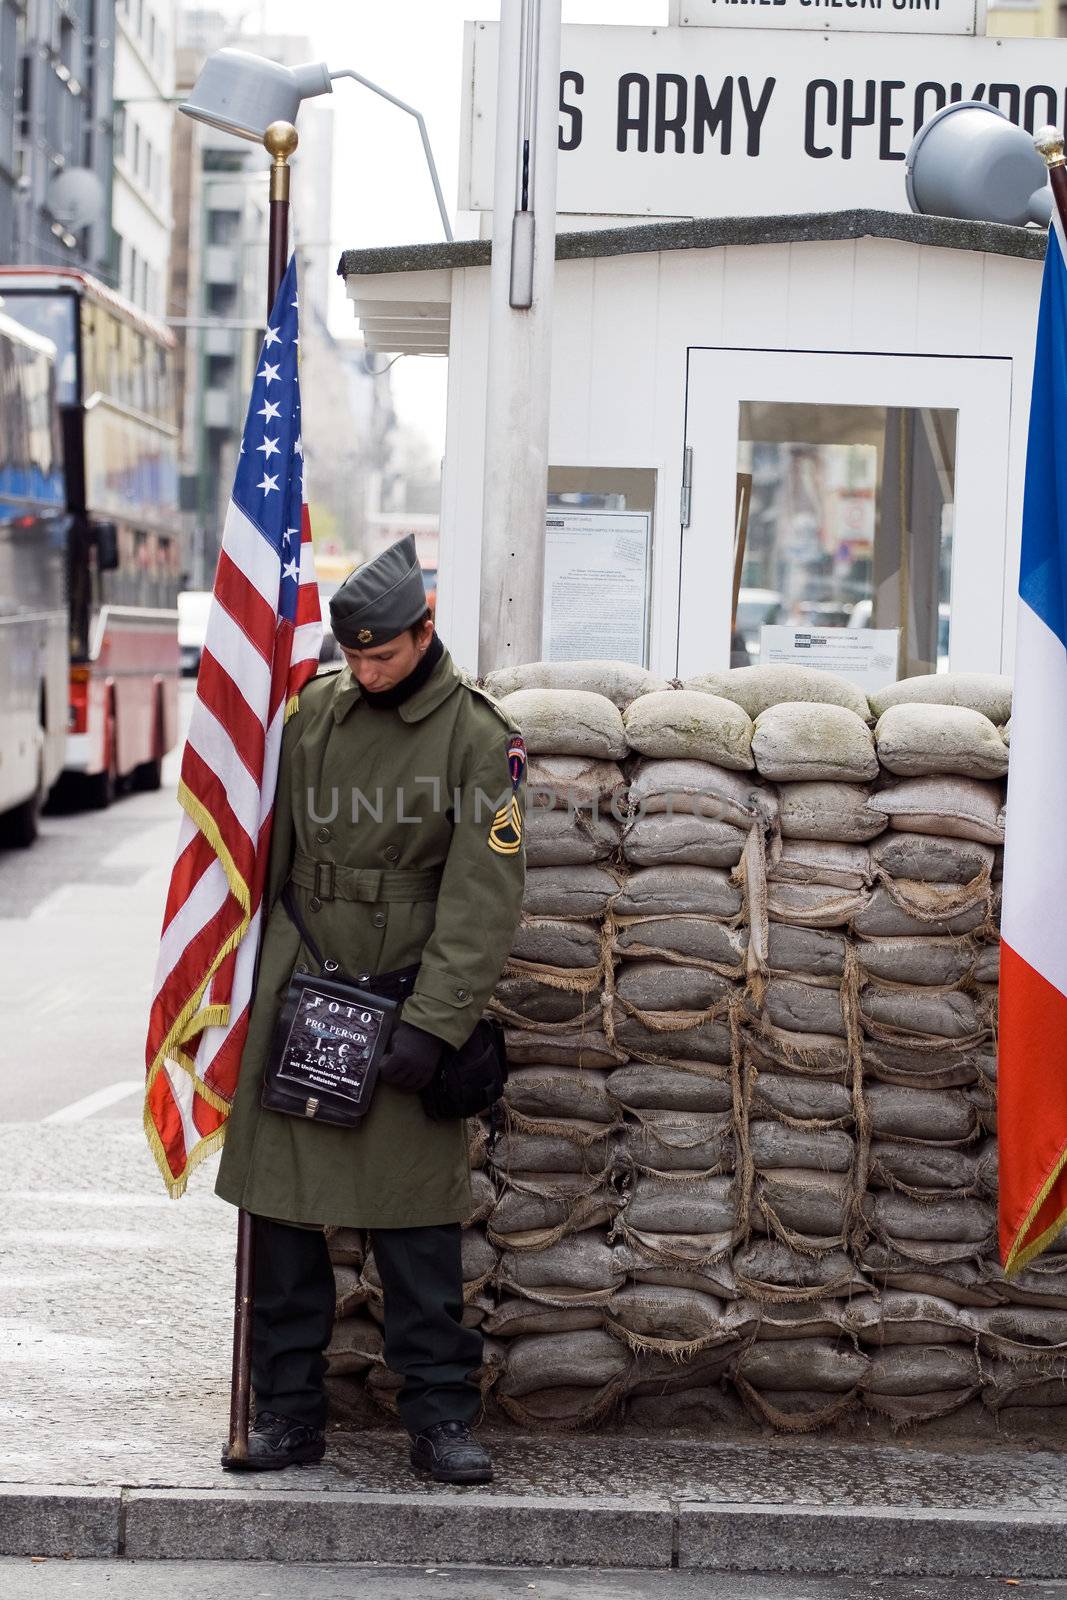 Checkpoint charlie by ints